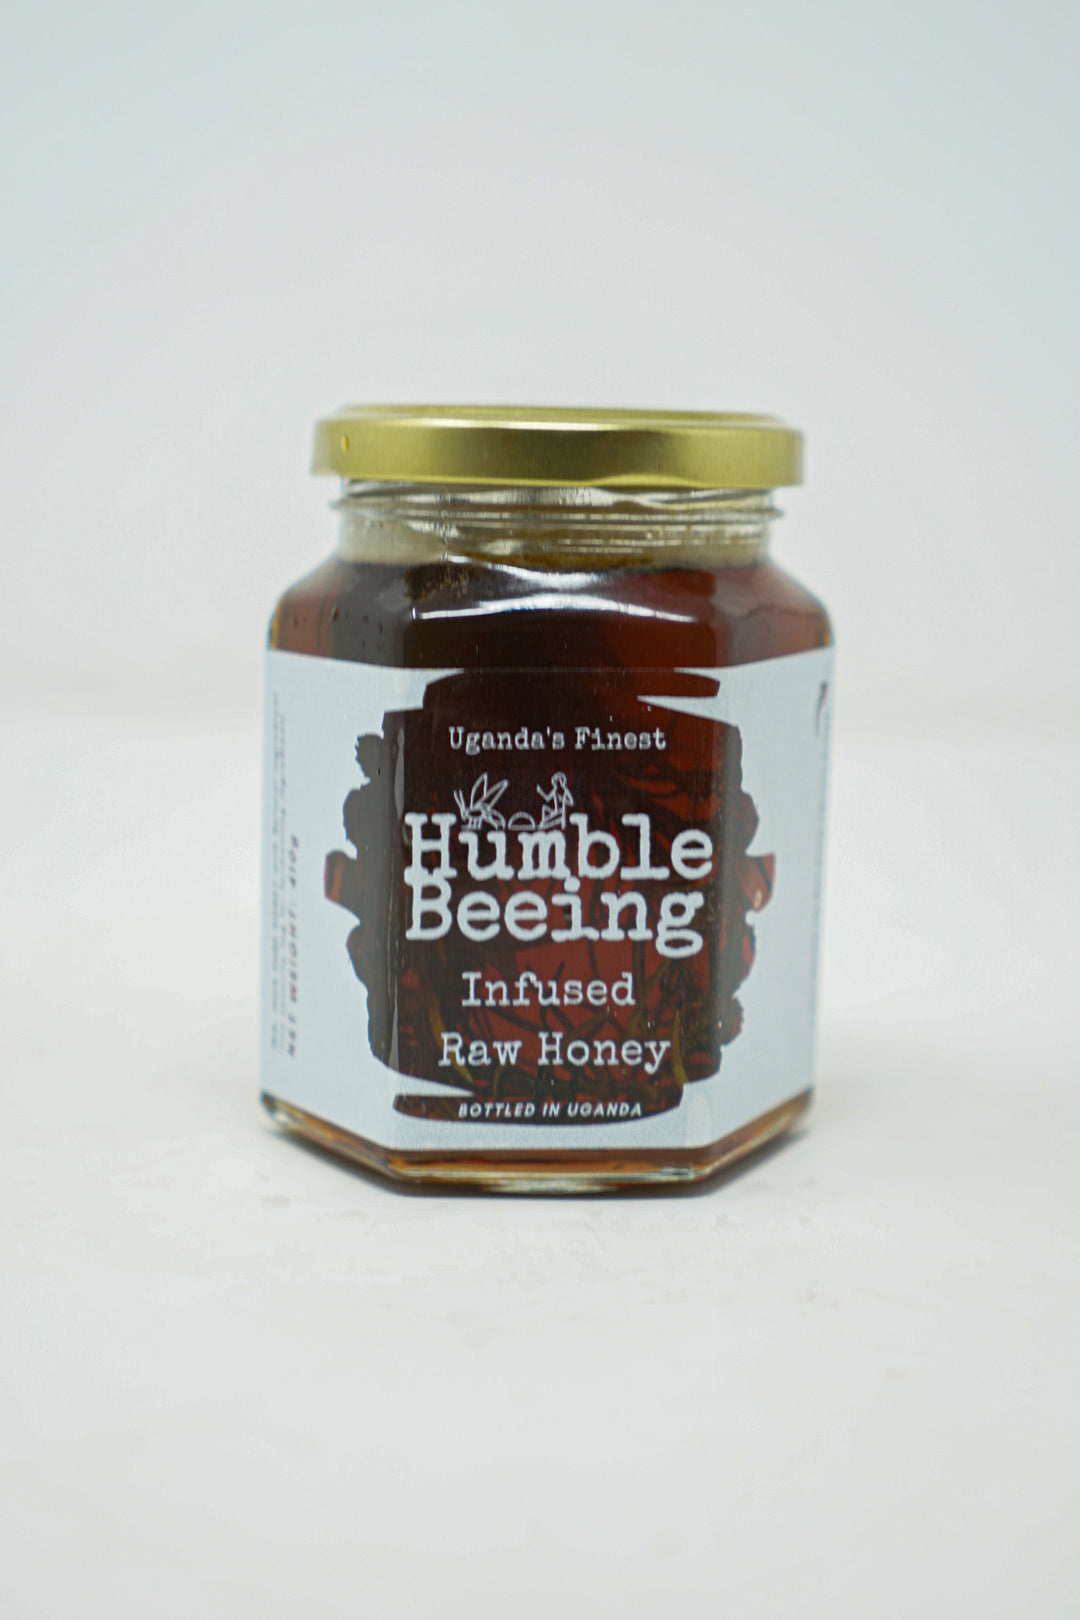 Humble Being Infused Raw Honey 250g.